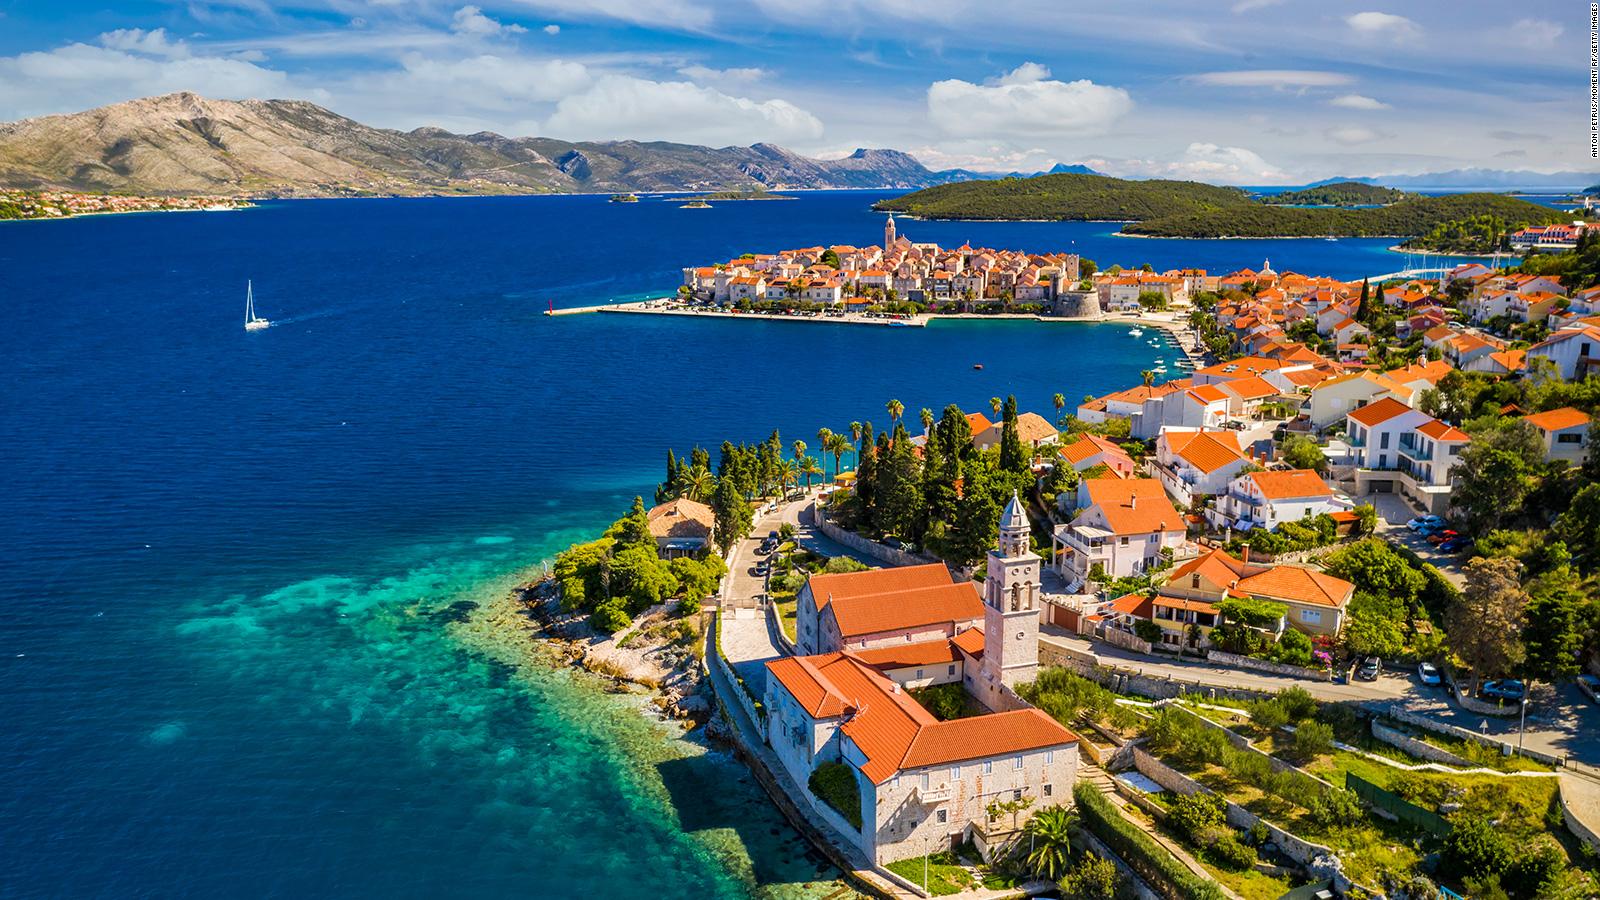 Croatia changes its currency on a historic day and joins the Eurozone